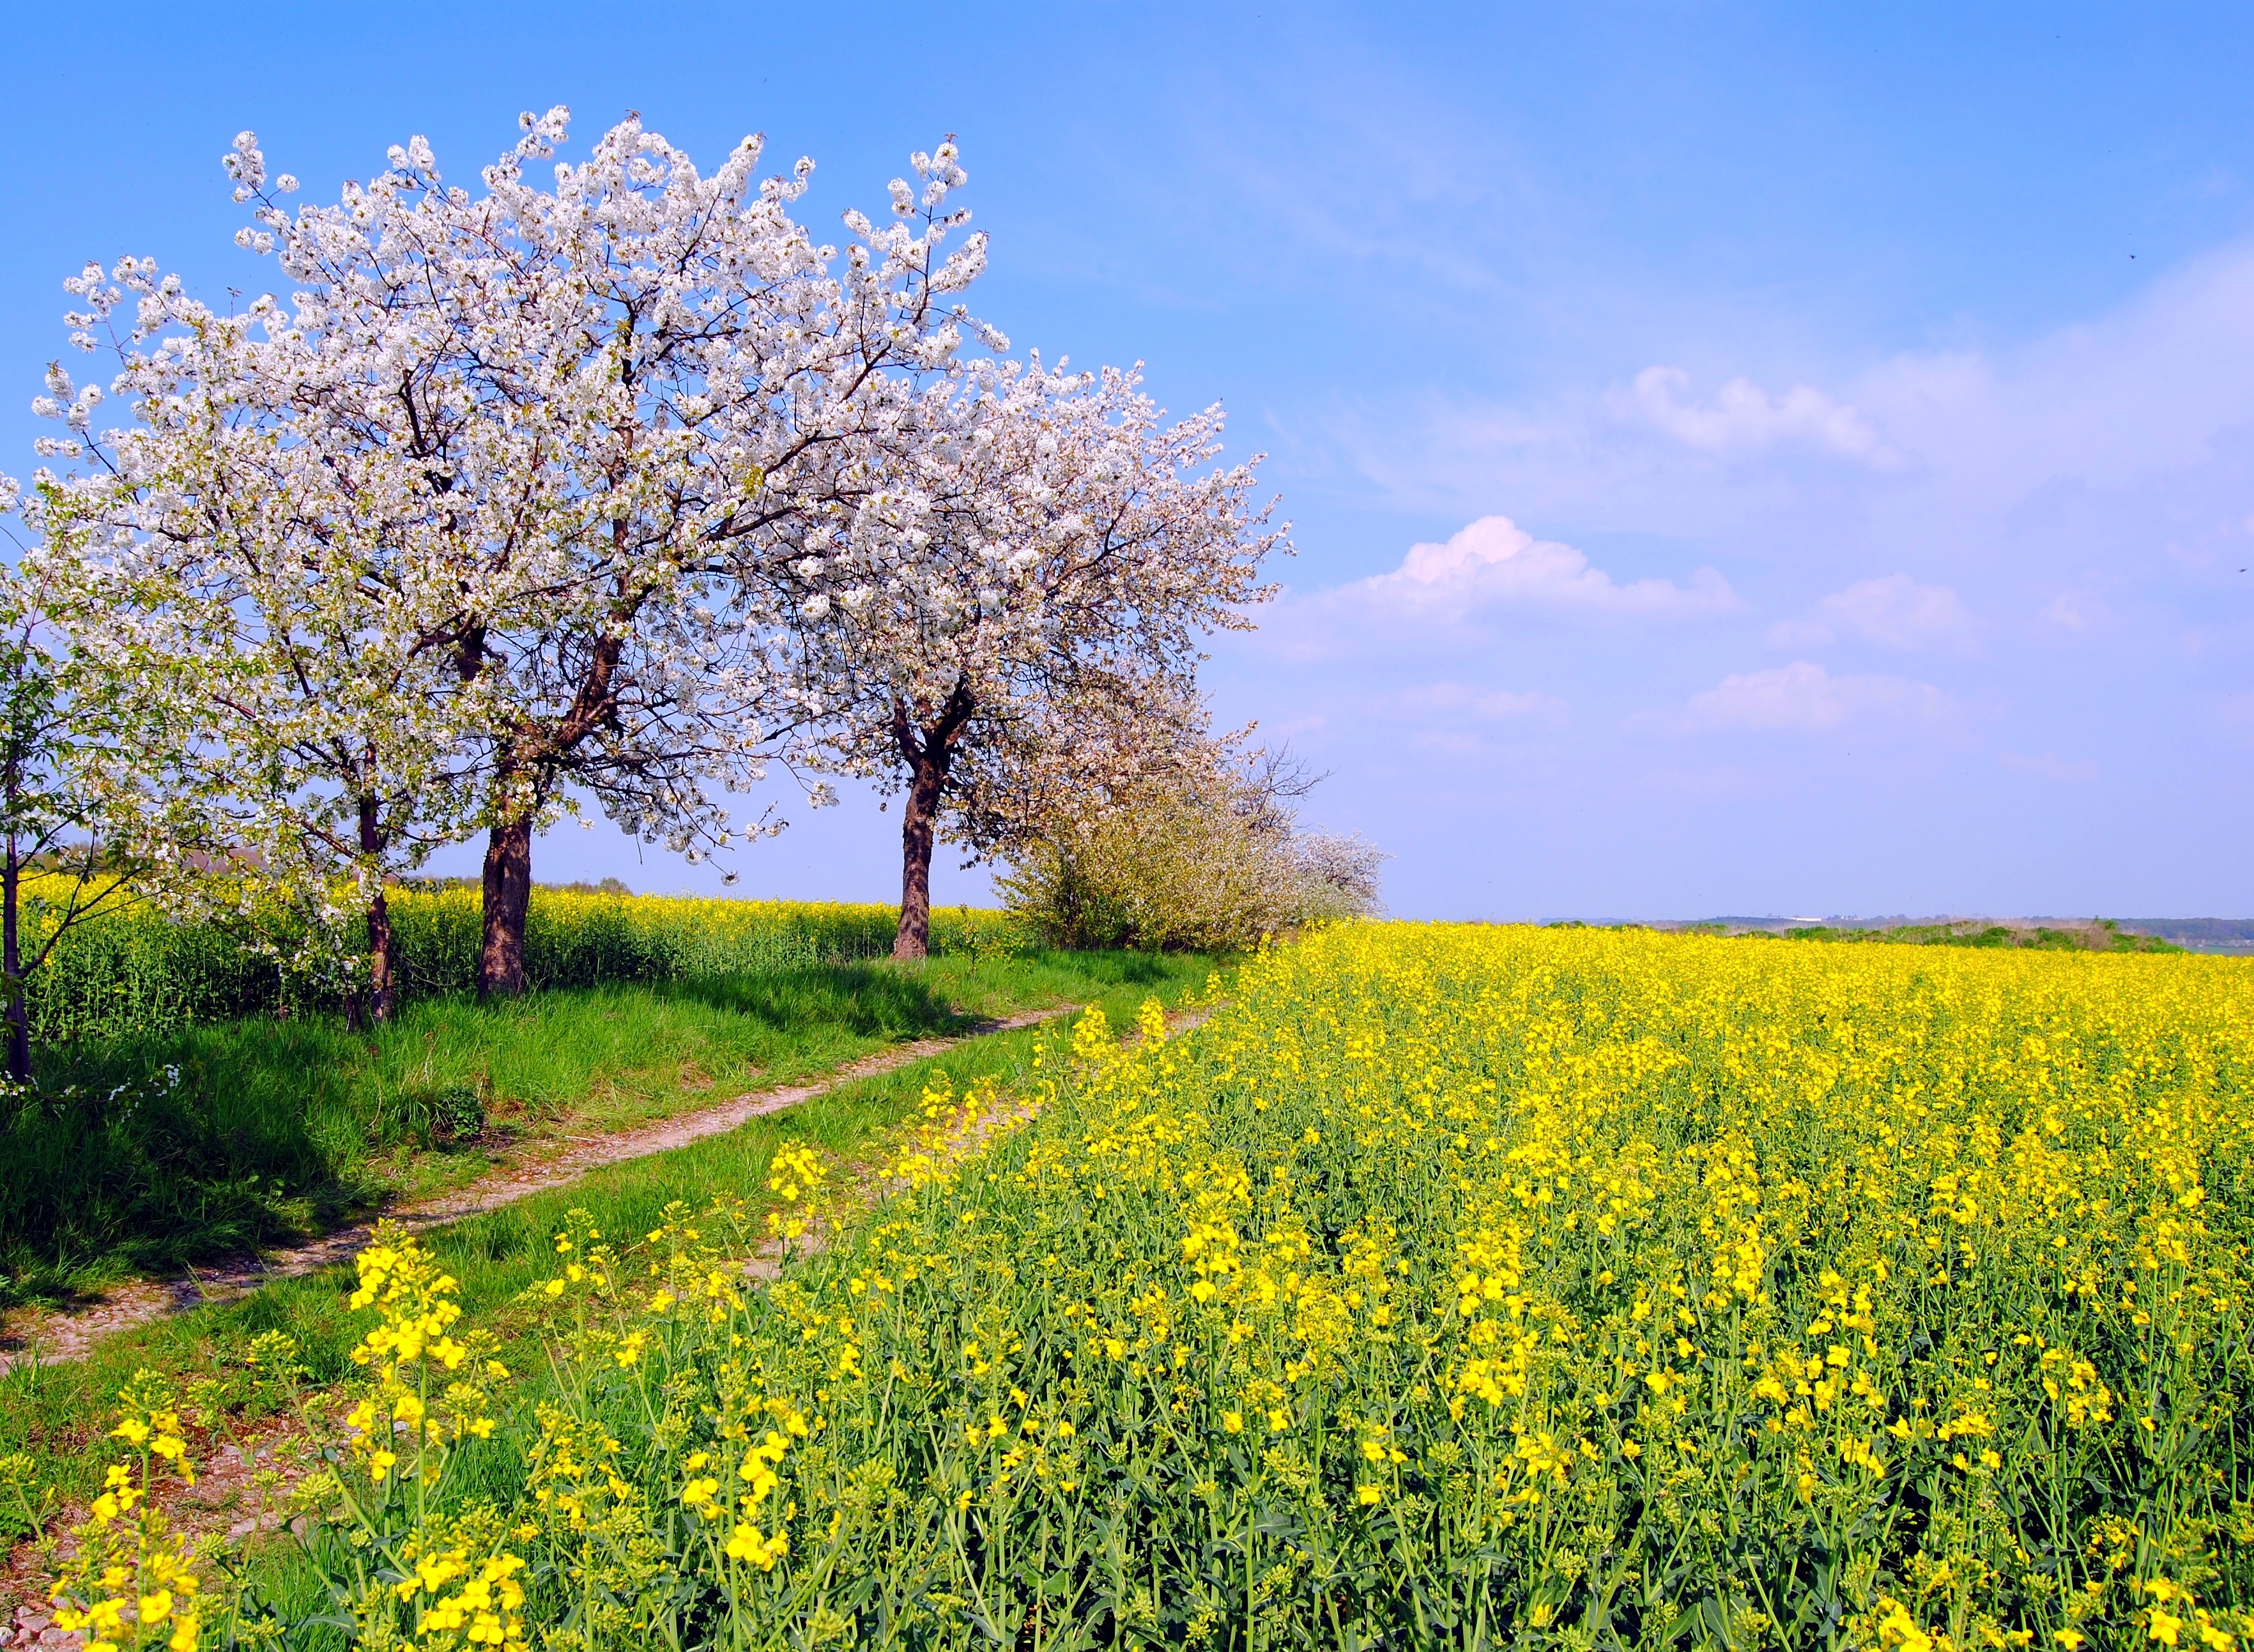 spring, field, earth, rapeseed, blossom, flower, nature, path, tree, yellow flower